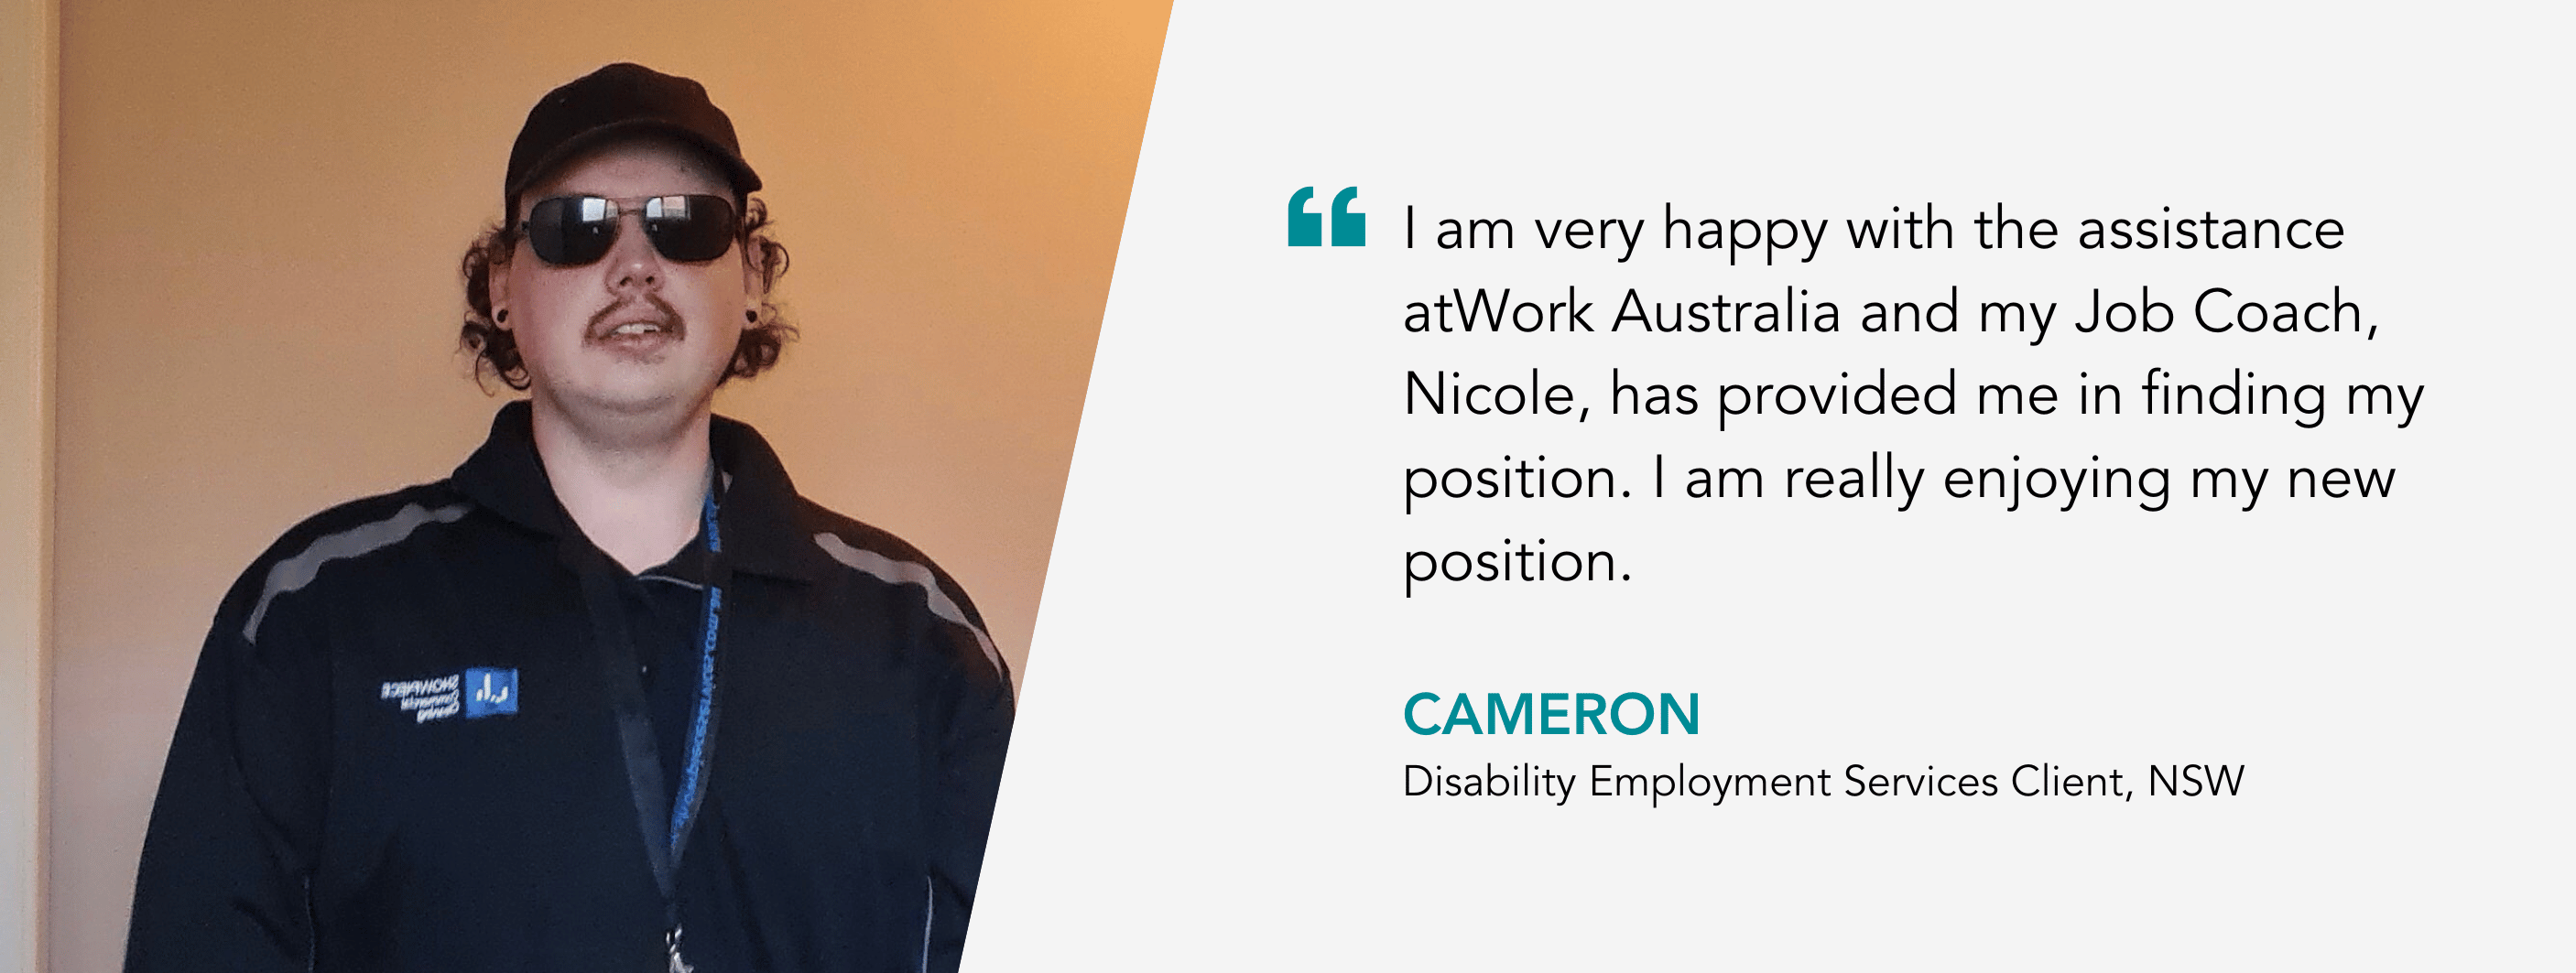 “I am very happy with the assistance atWork Australia and my Job Coach, Nicole, has provided me in finding my position. I am really enjoying my new position.” – Cameron, Disability Employment Services Client. 